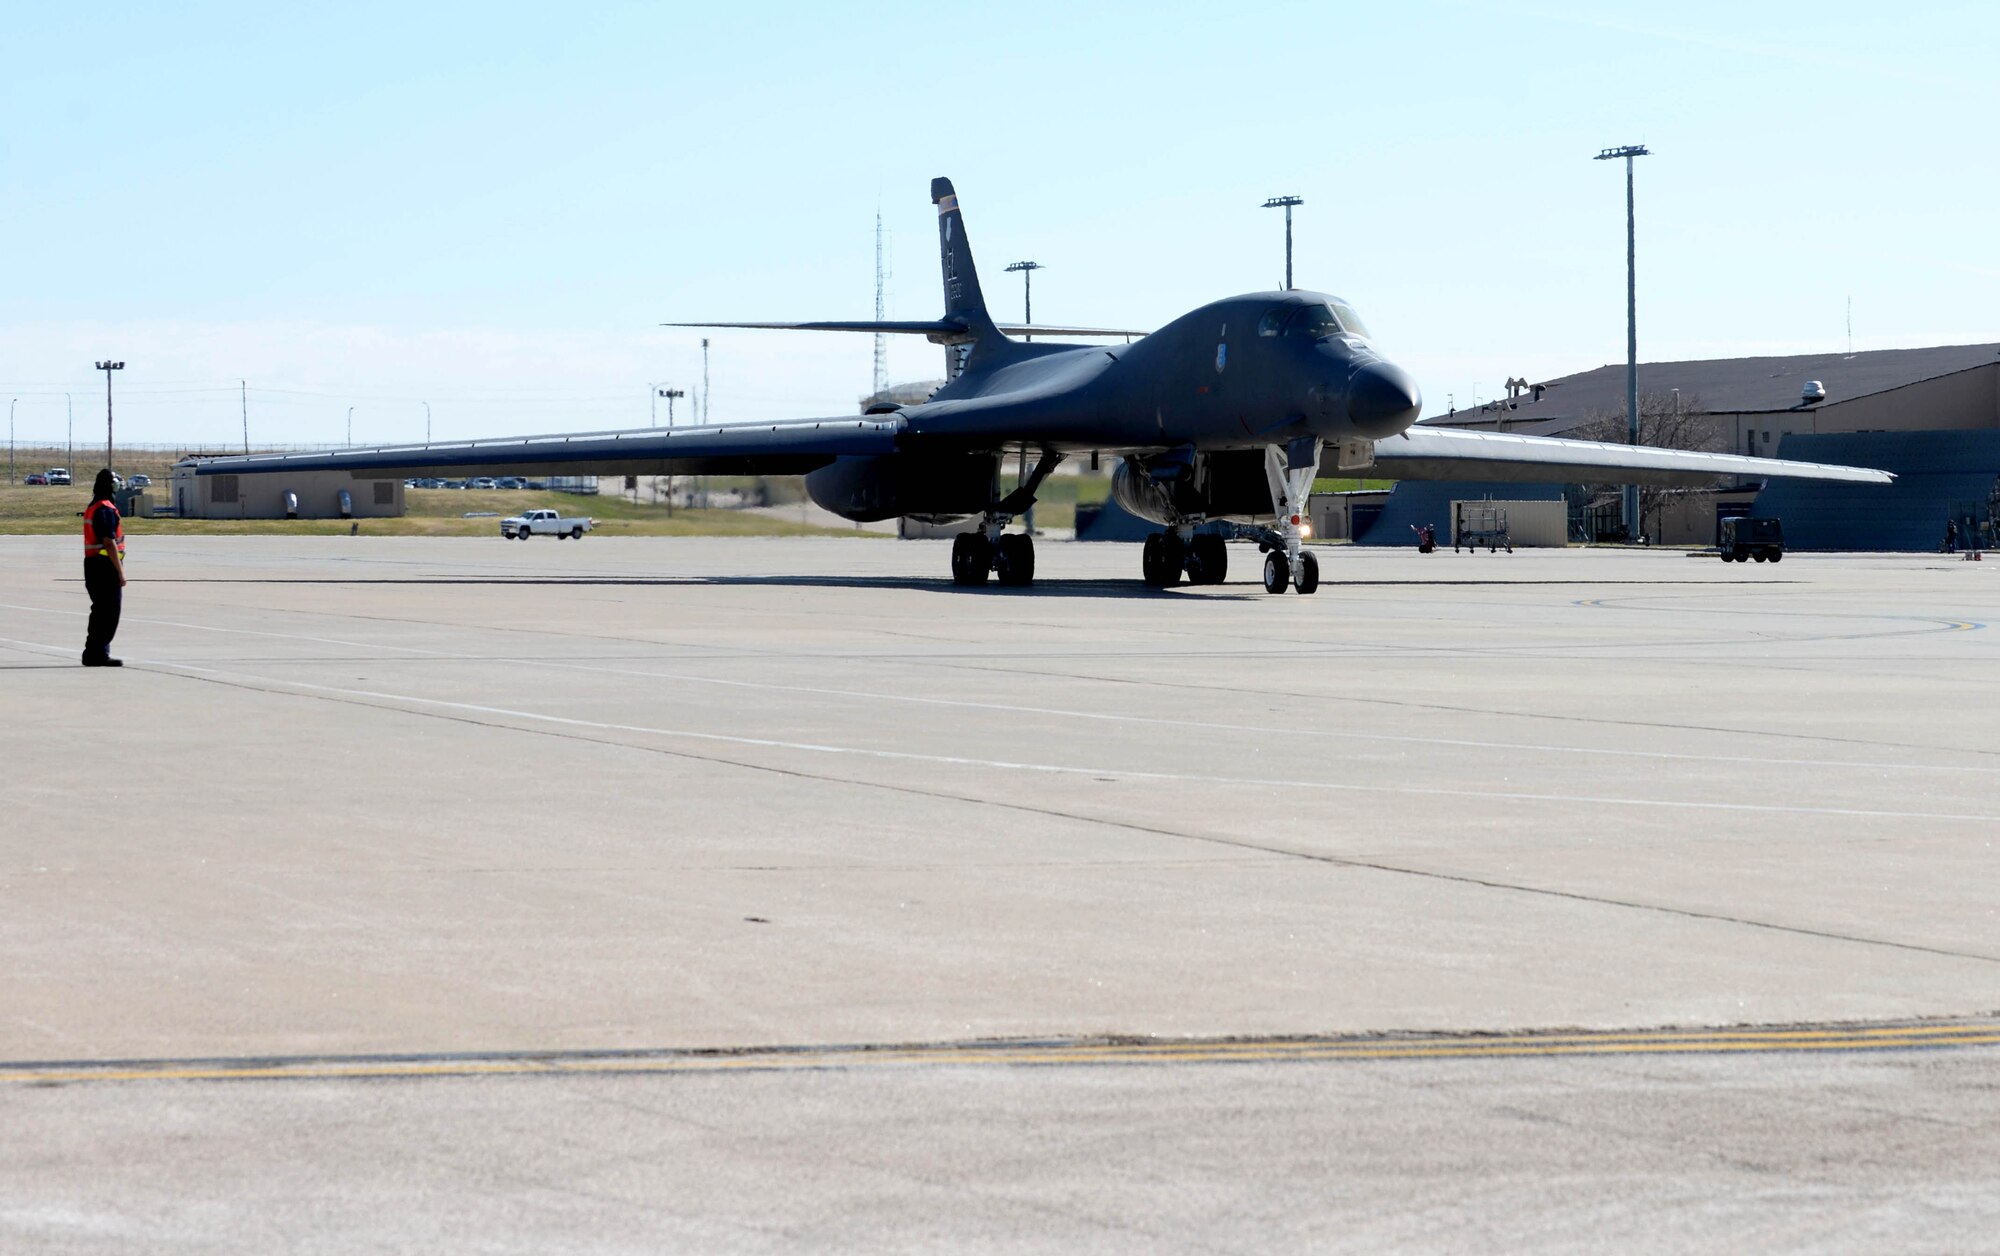 A U.S. Air Force B-1B Lancer is marshaled to the taxiway at Ellsworth Air Force Base, S.D., April 21, 2020. The B-1B’s speed and superior handling characteristics allow it to seamlessly integrate in mixed force packages. (U.S. Air Force photo by Airman Quentin K. Marx)